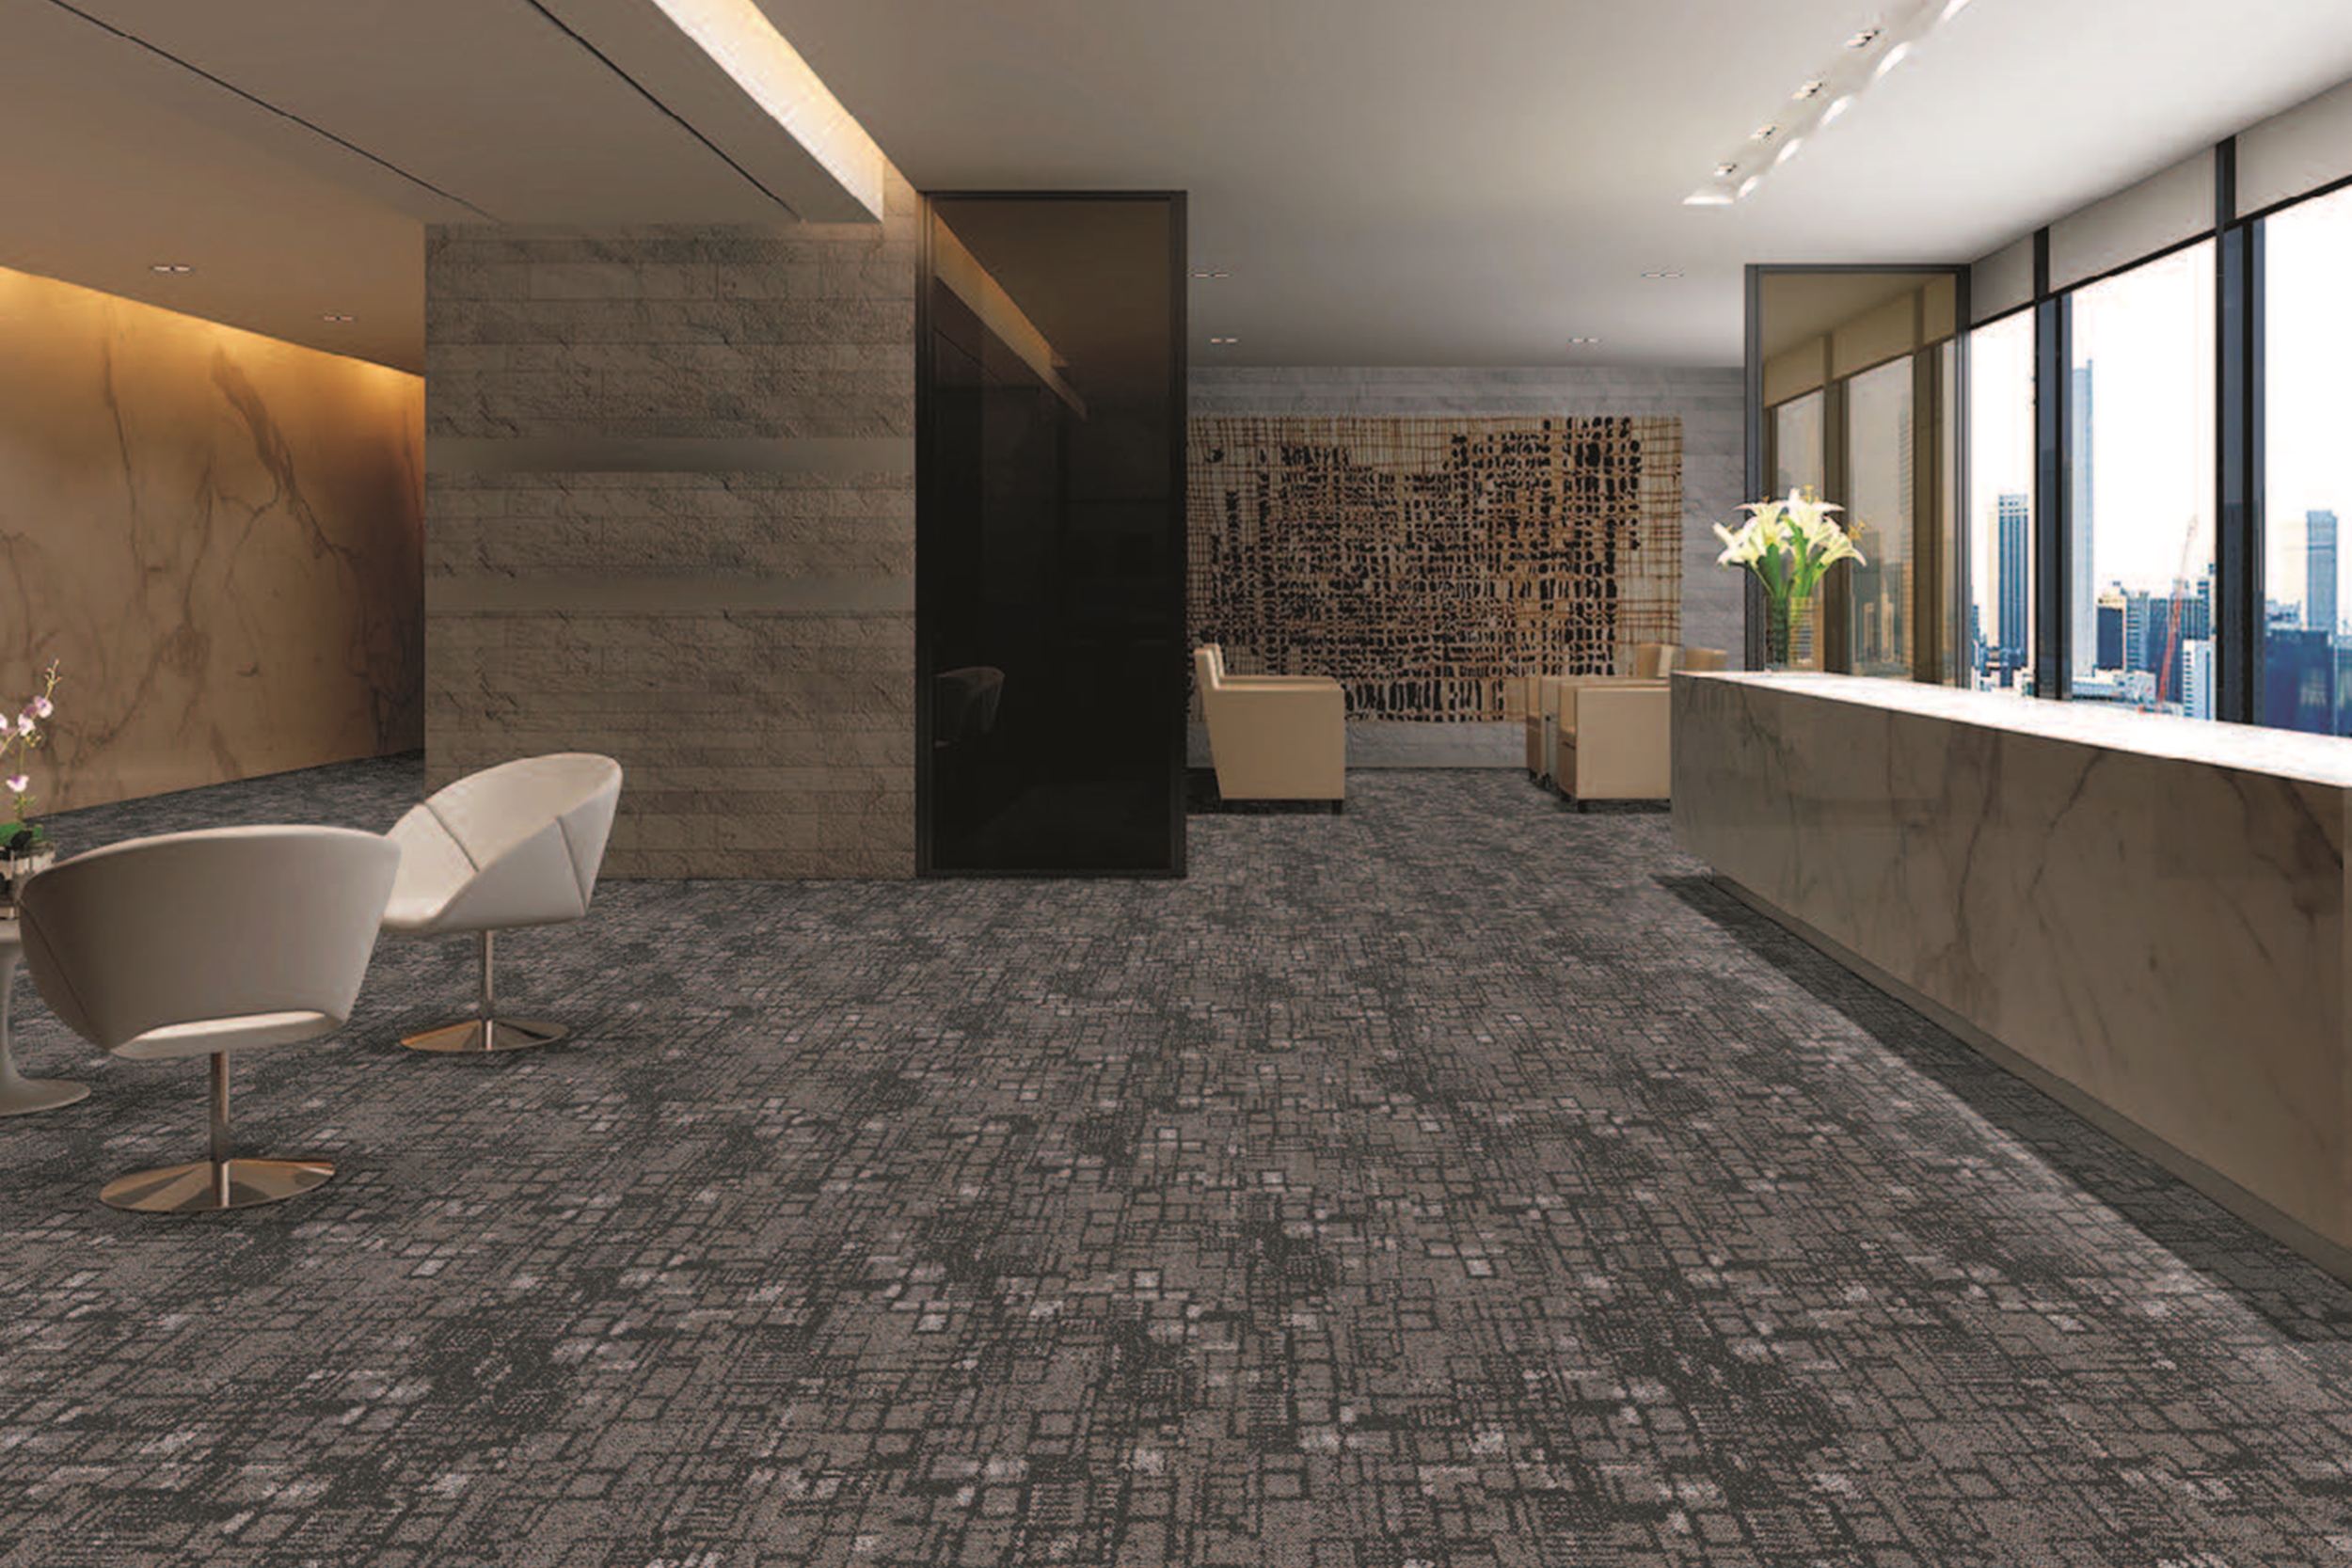 Flooring solutions with office carpet tiles in Singapore